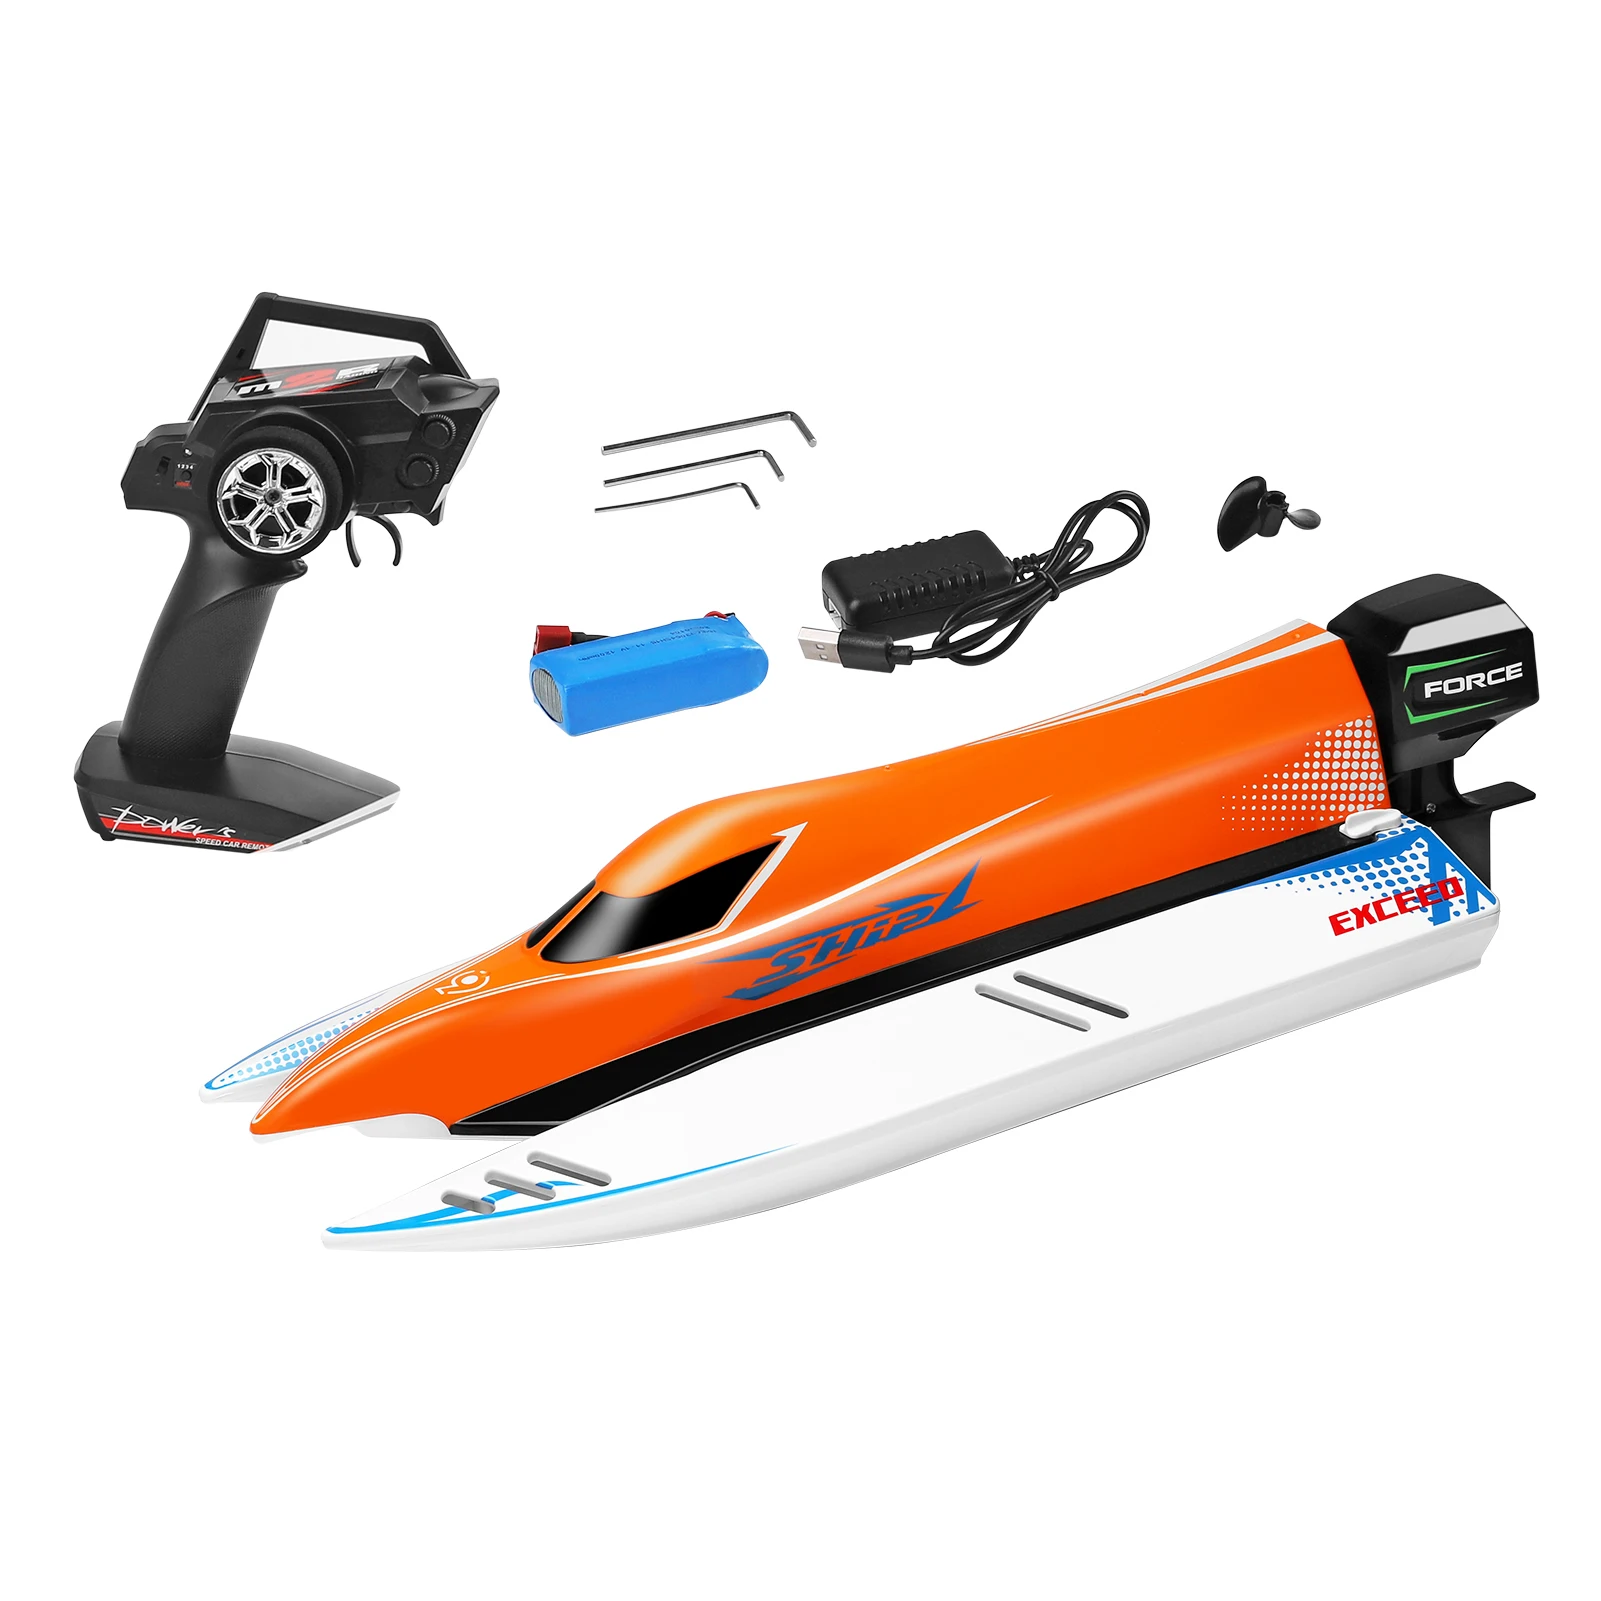 WLtoys WL915-A Boat Remote Control Boats 2.4G 45km/h High Speed RC Boat RC Toy Gift for Kids Adults Boys Girls